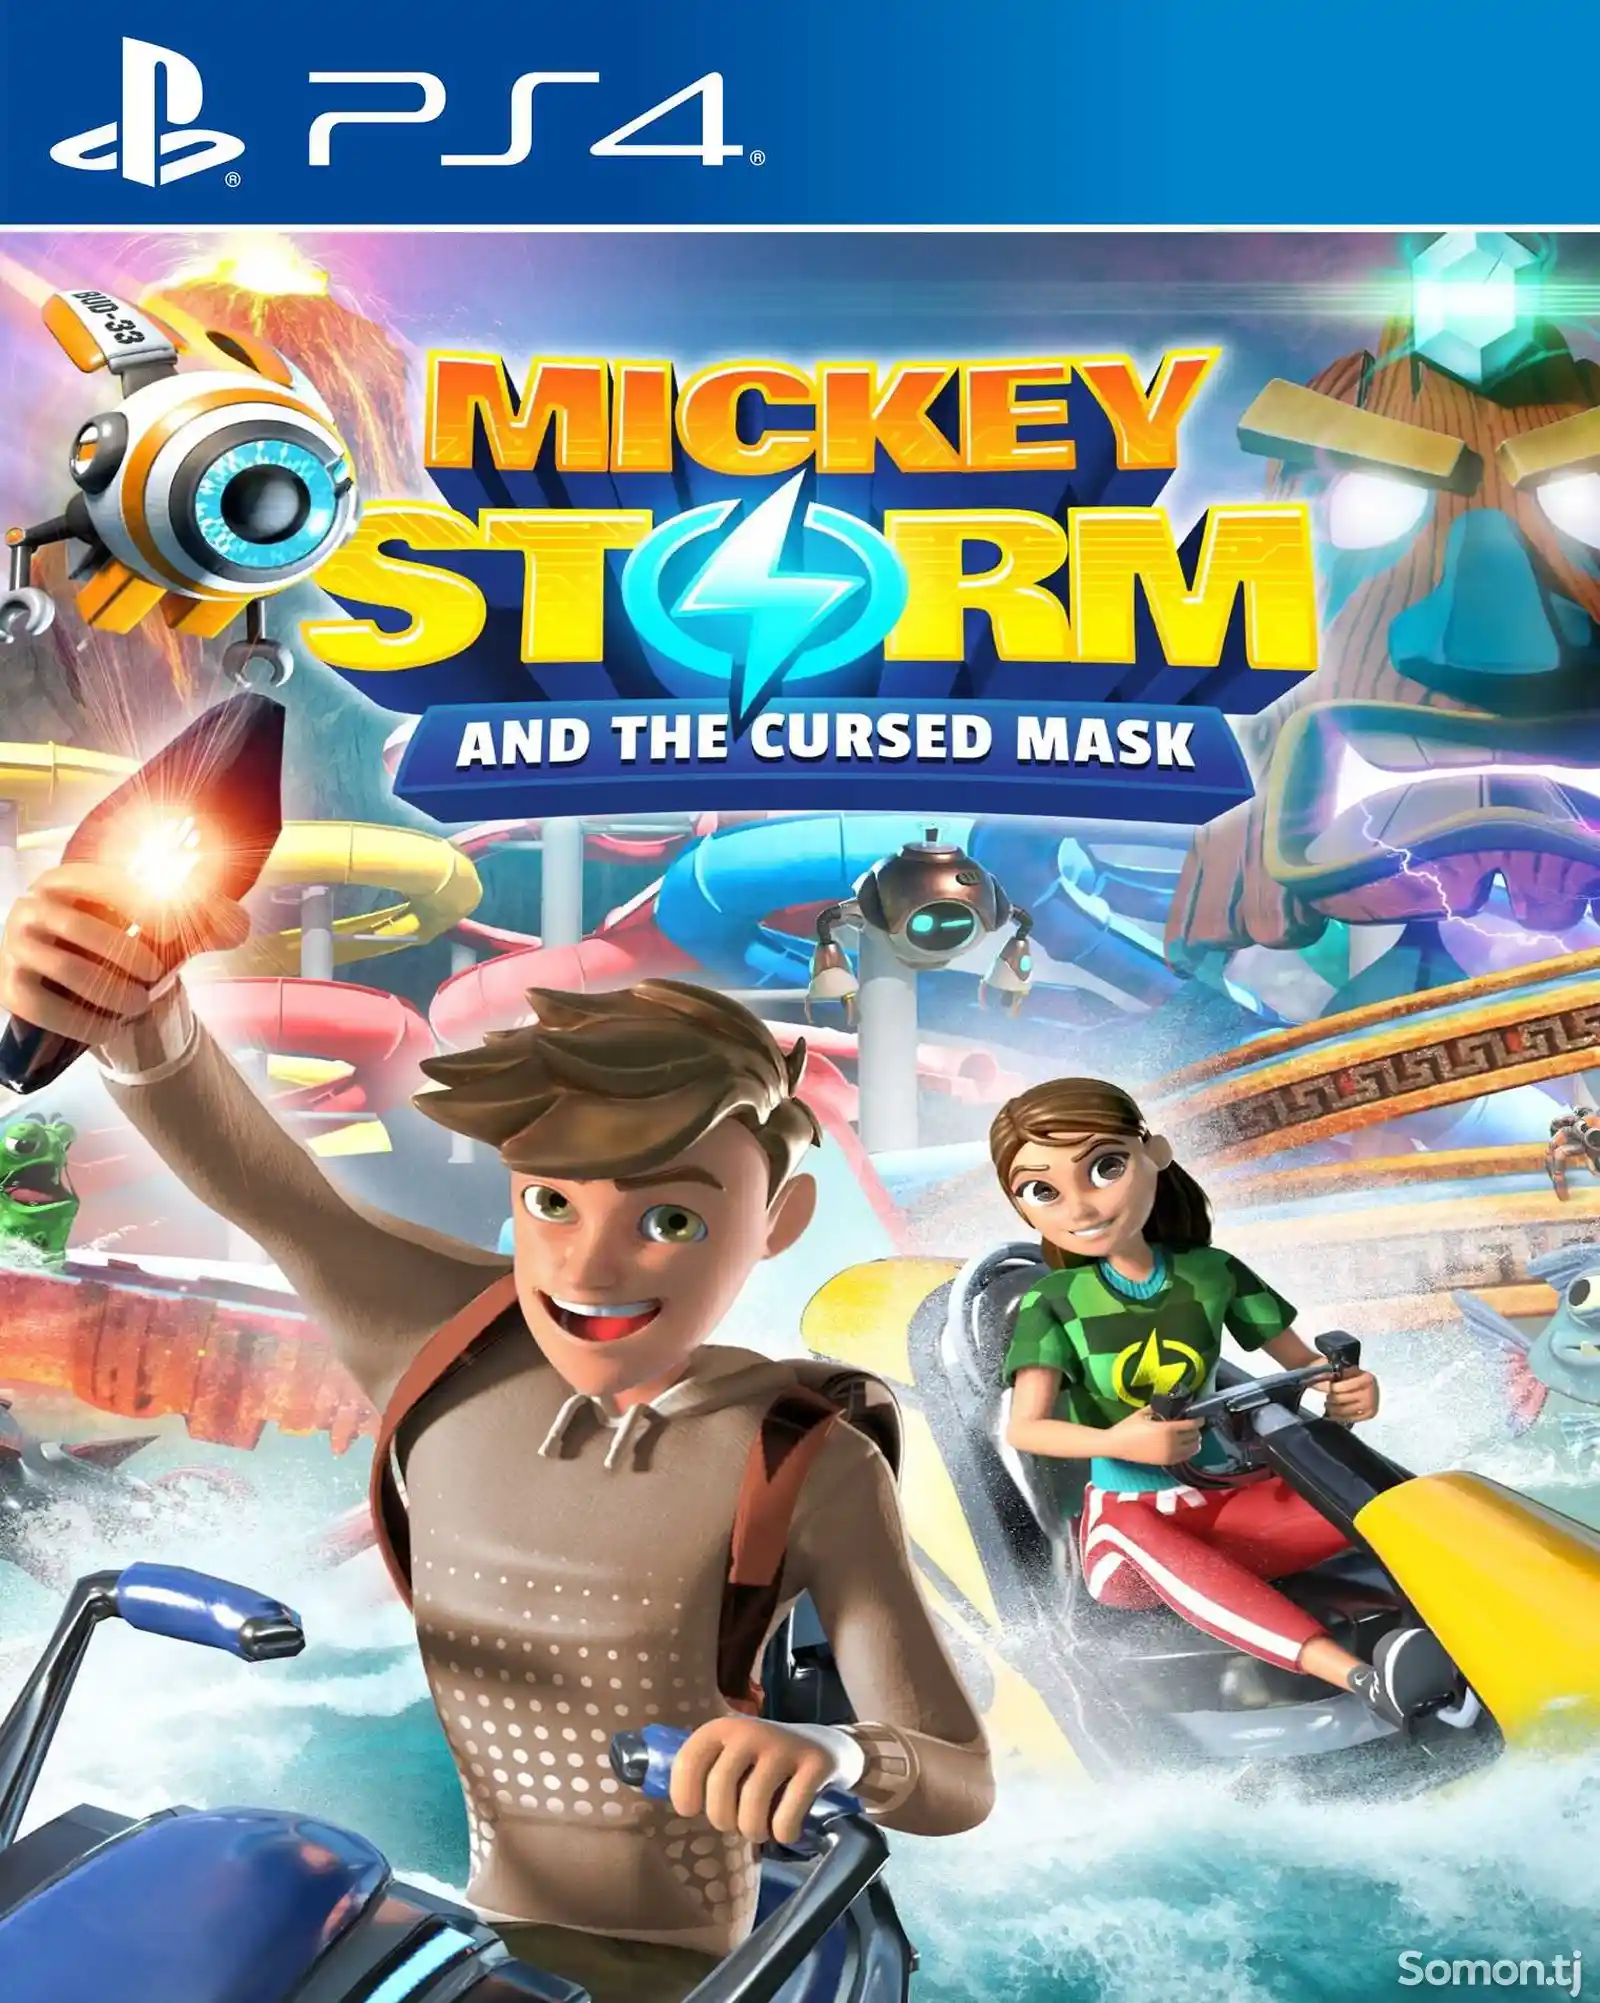 Игра Mickey storm and the cursed mask для PS-4 / 5.05 / 6.72 / 7.02 / 9.00 /-1